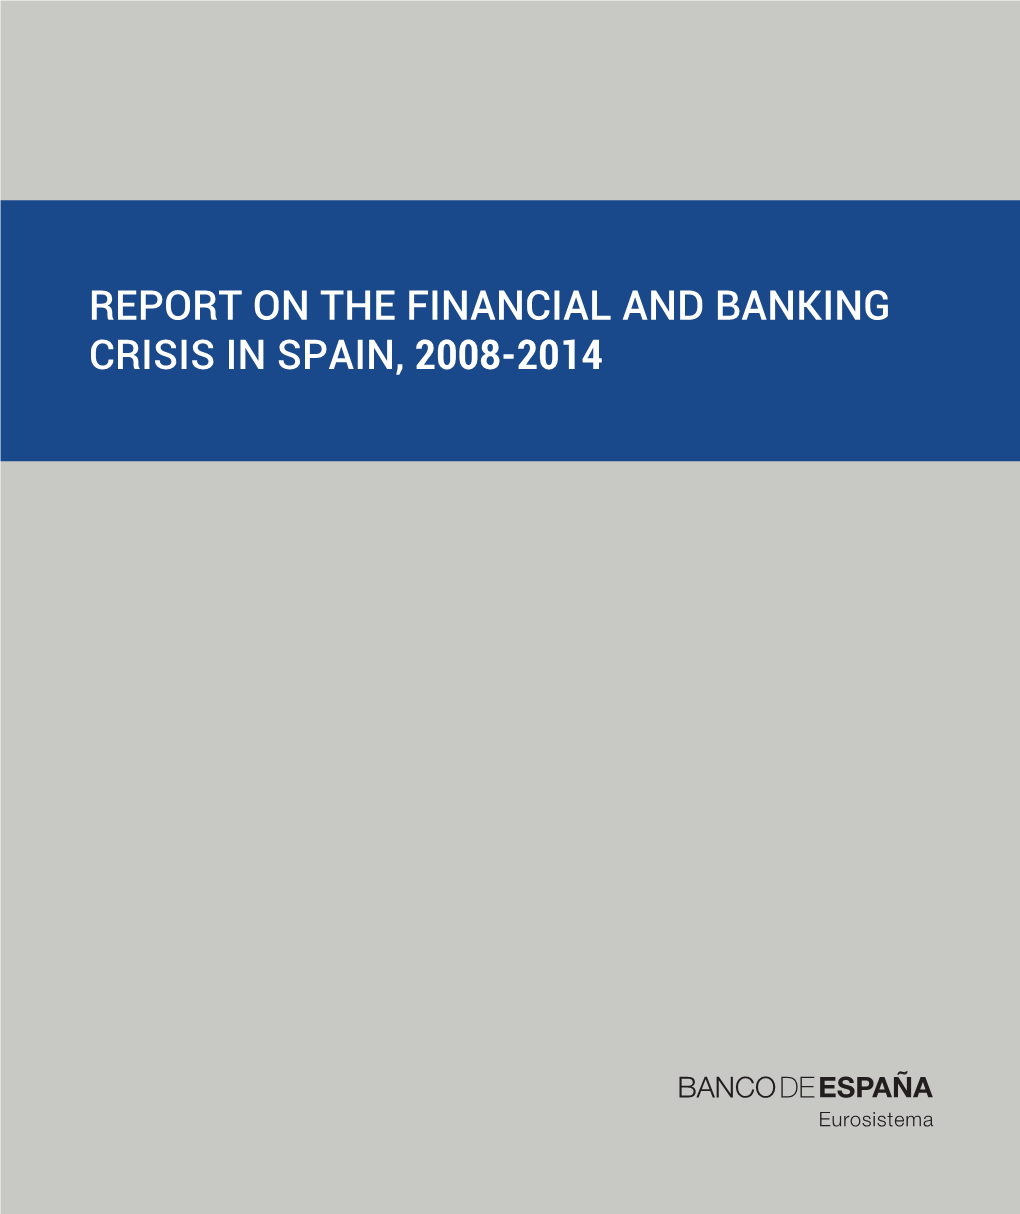 Report on the Financial and Banking Crisis in Spain, 2008-2014